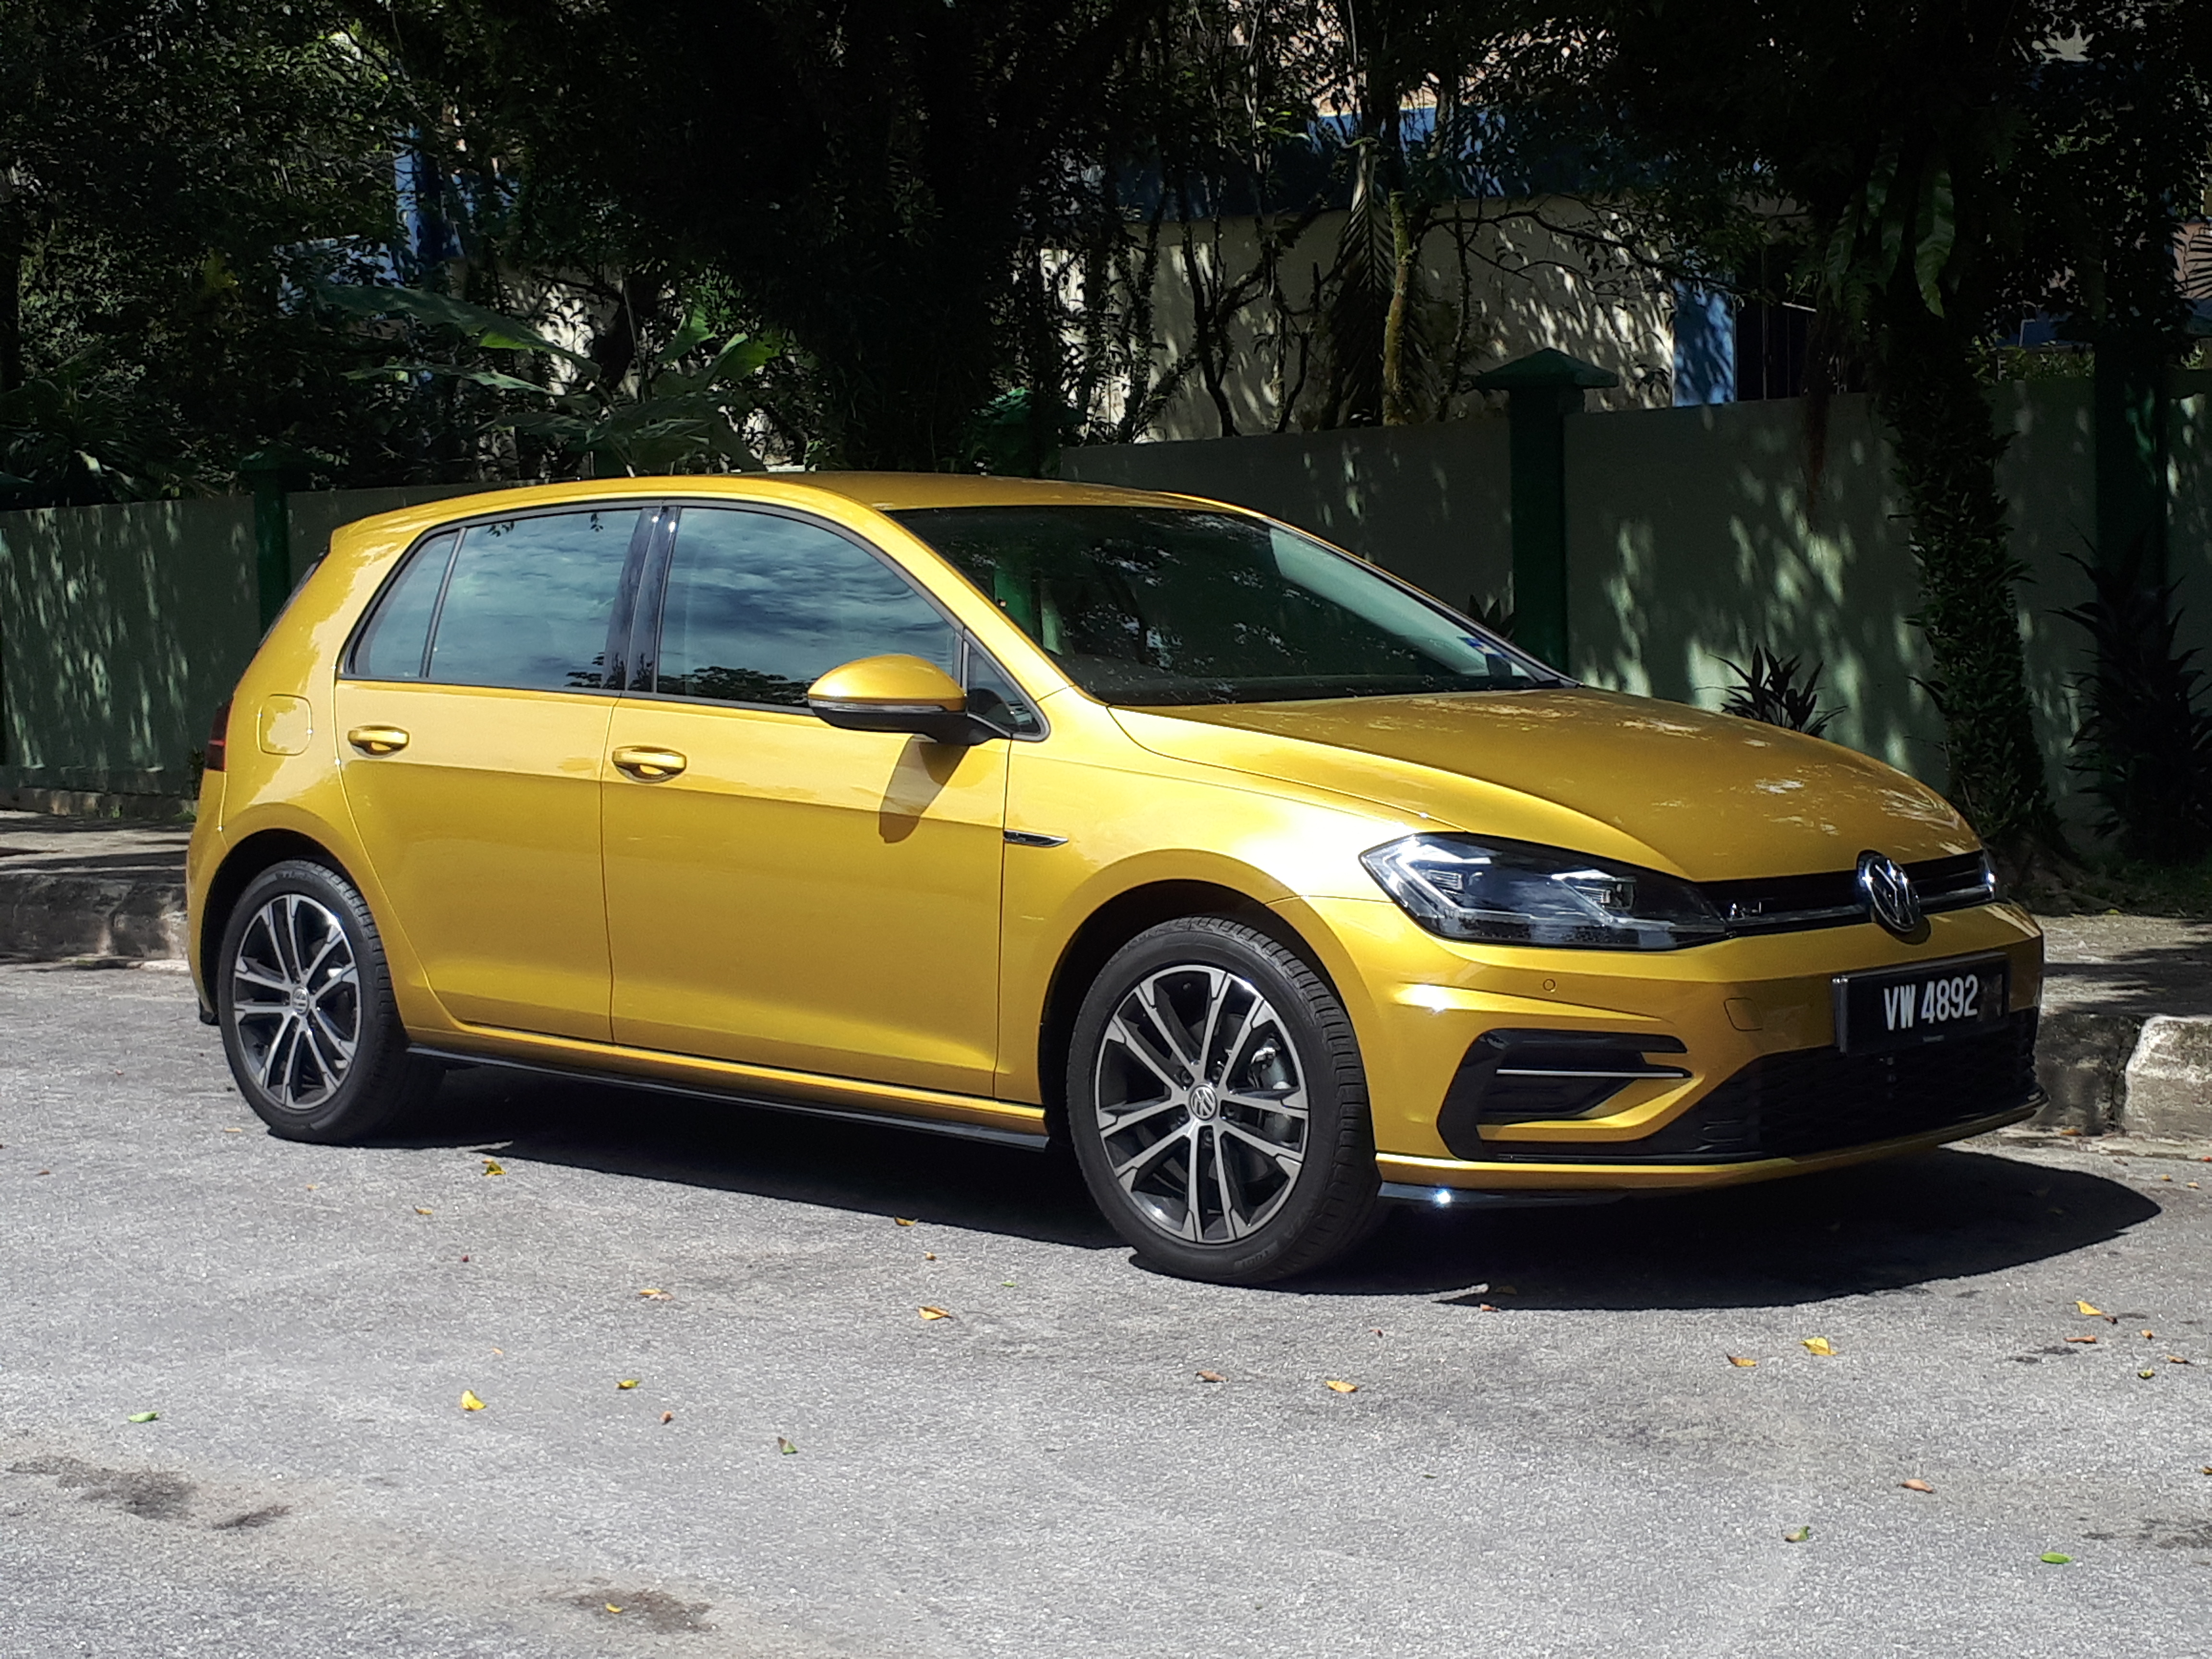 REVIEWED: VW Golf 1.4 TSI R-Line - News and reviews on Malaysian motorcycles and automotive lifestyle